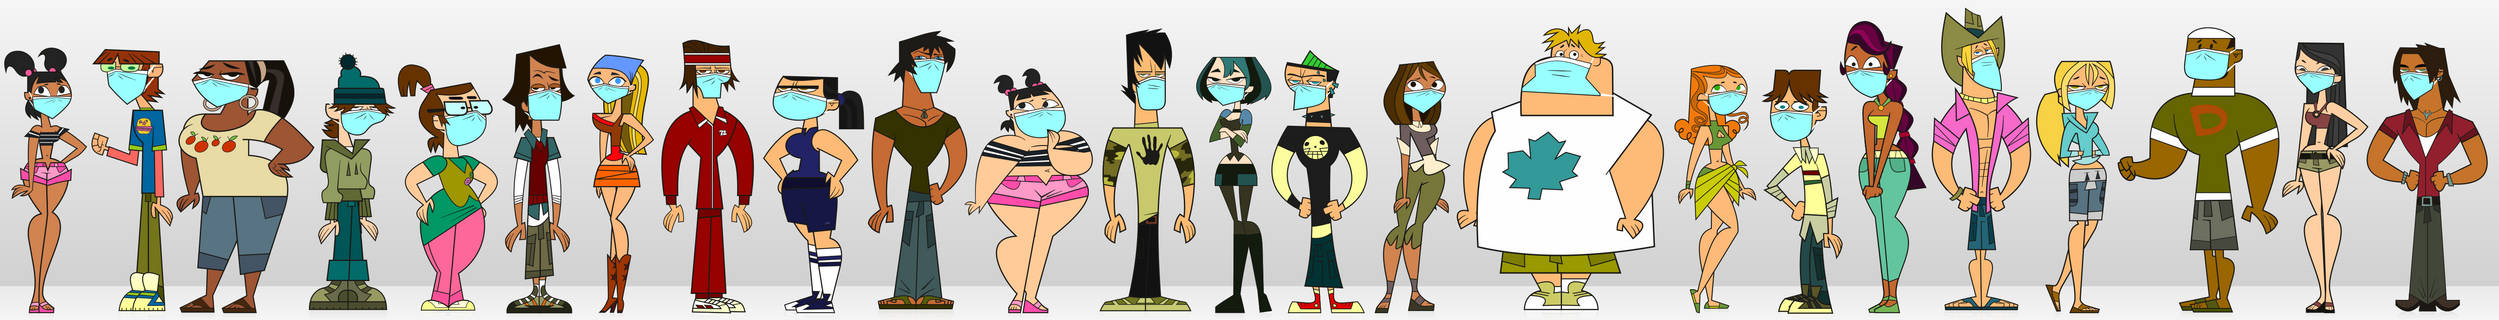 Surgical Masked Total Drama Contestants